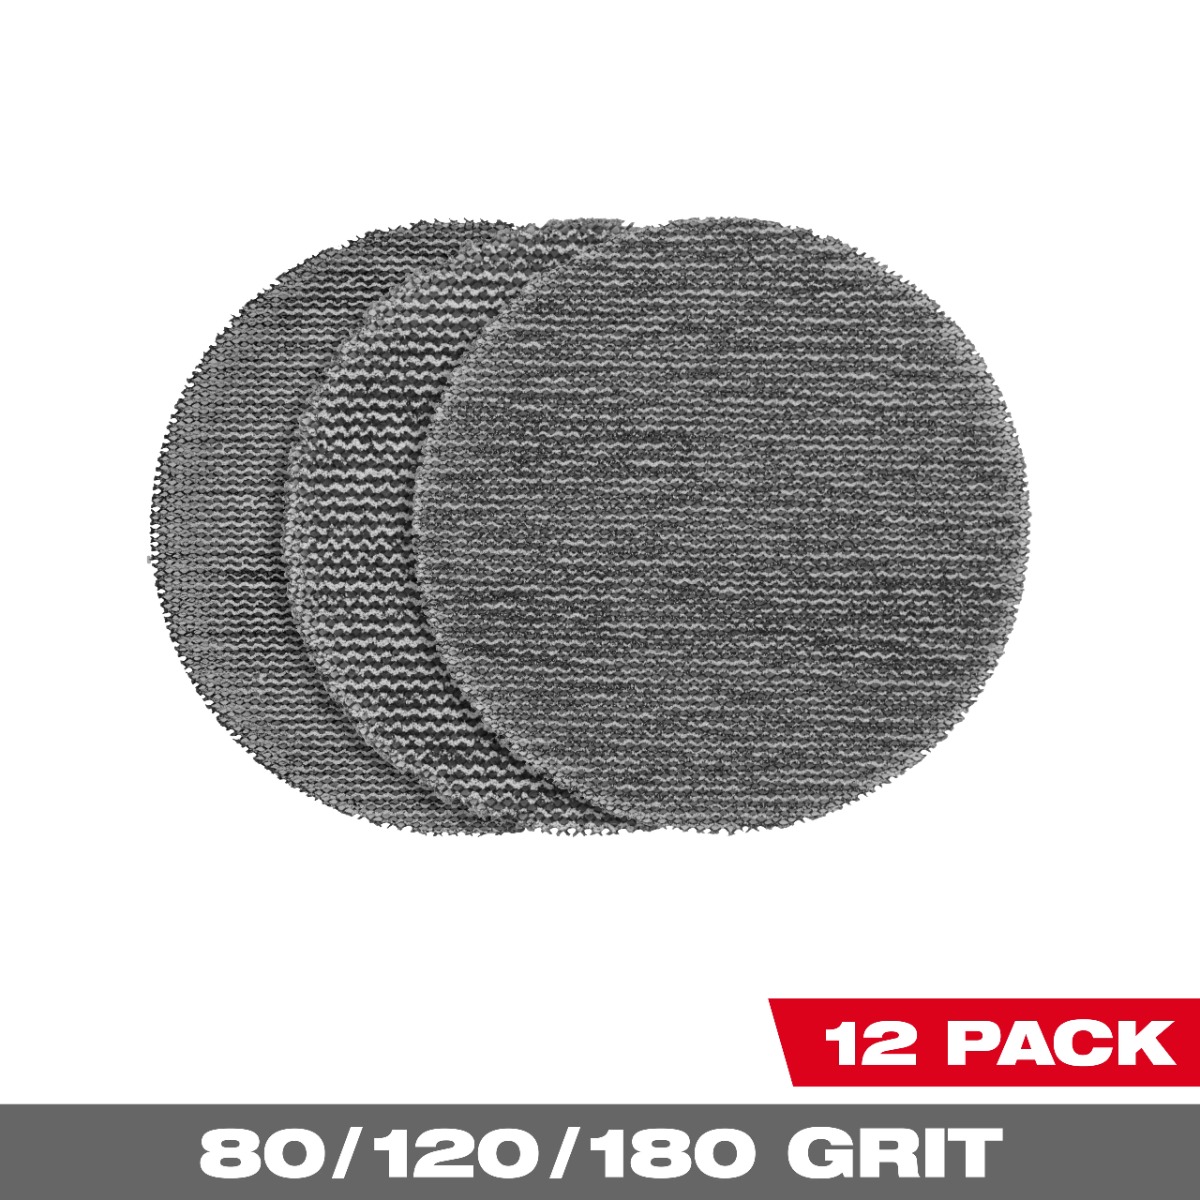 3” Assorted 80, 120, 180 Grit Mesh Sanding Discs with POWERGRID™ Tear Resistant Mesh – 12 pk + Pad Saver